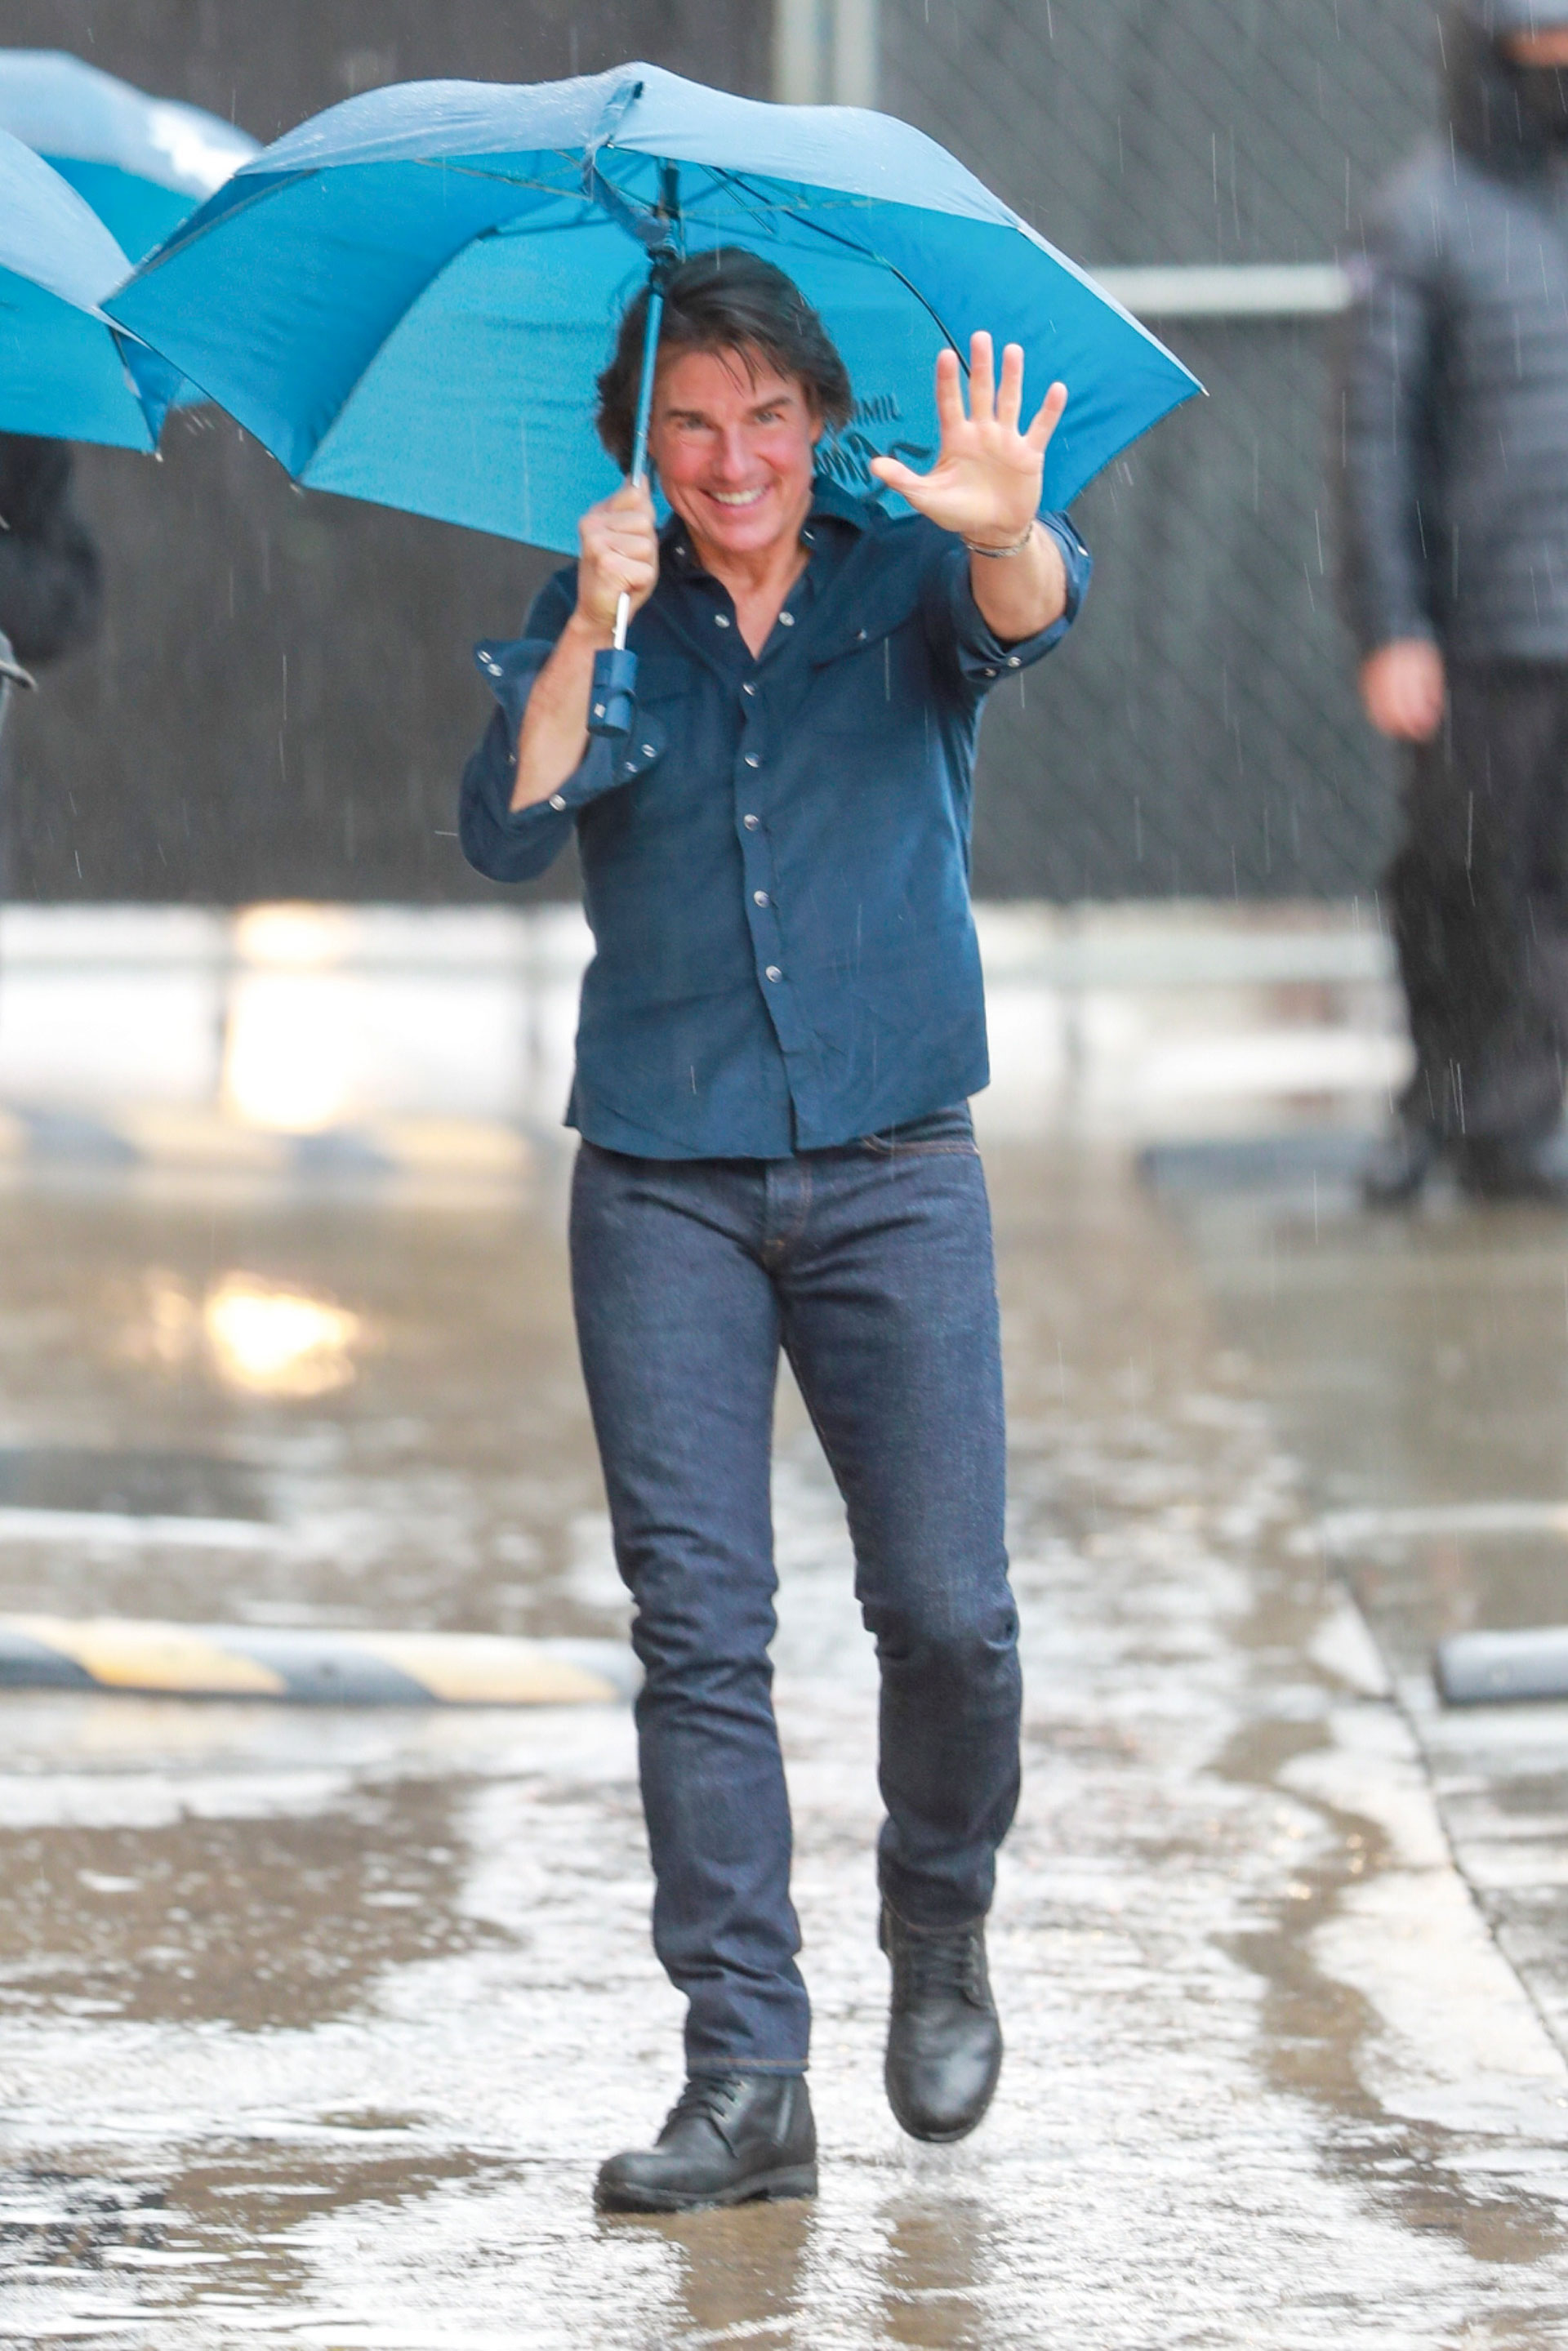 Tom Cruise braved a rainy day to attend Jimmy Kimmel's Hollywood show as a guest.  The actor greeted the fans who came there as well as the local press.  He wore dark pants that he combined with a rolled-up blue shirt and black rubber shoes